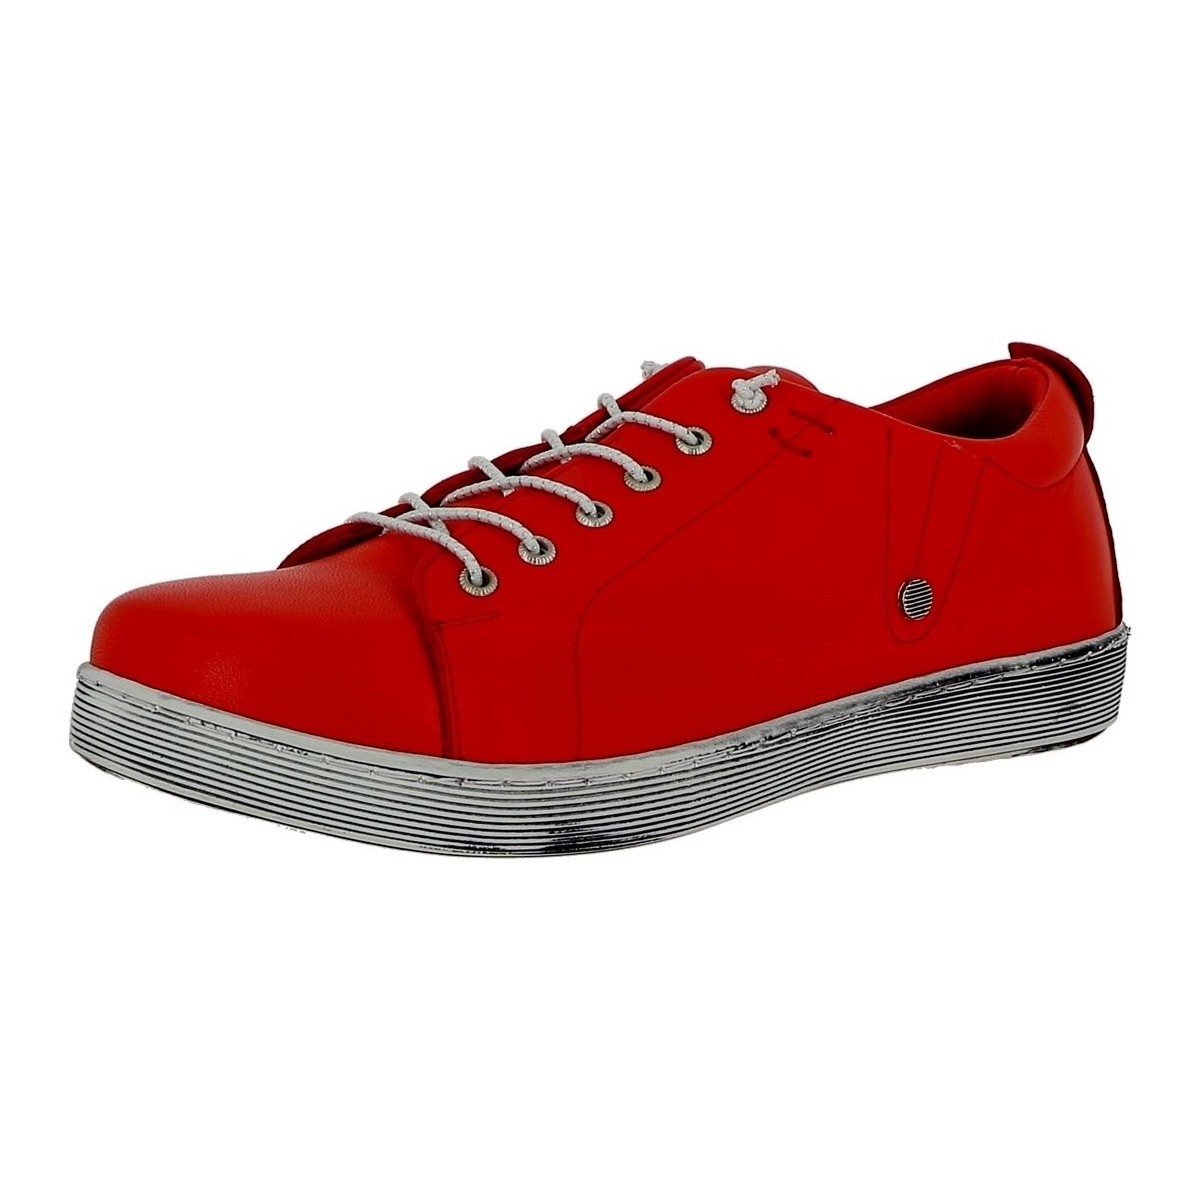 Chaussures Femme odessa sneakers eytys shoes odessa suede fuchsia DA.-SNEAKER Rouge